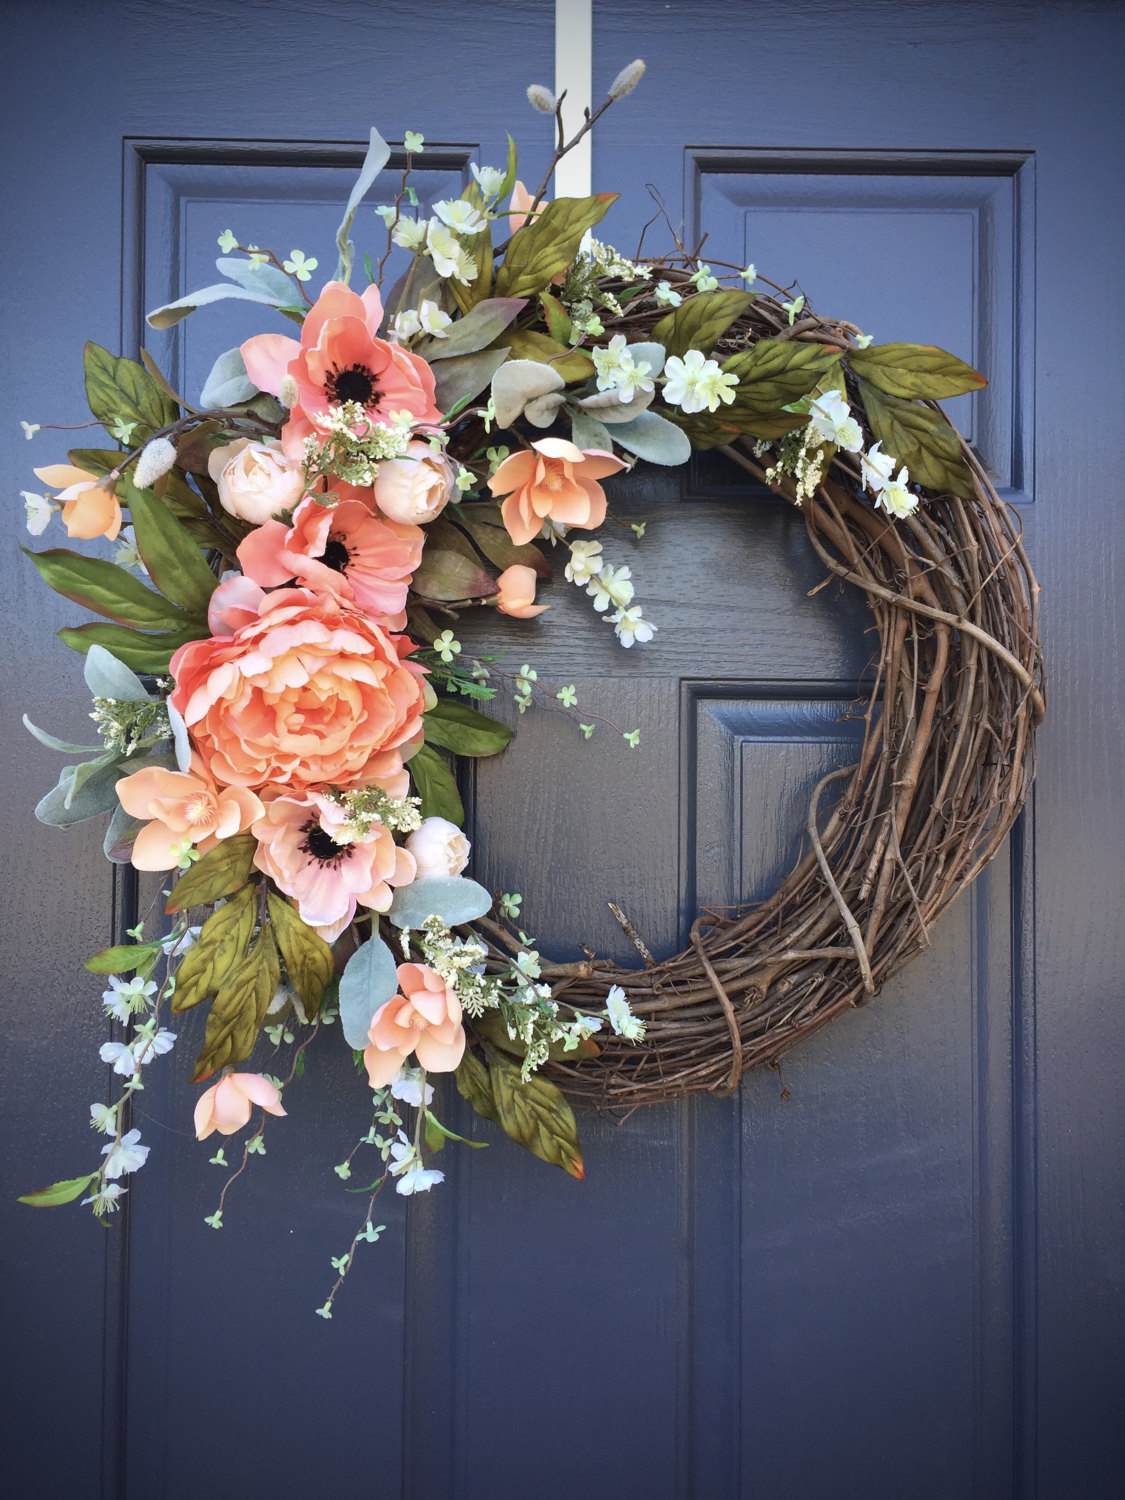 Flower Wreath Ideas To Make Your Front Porch Welcoming